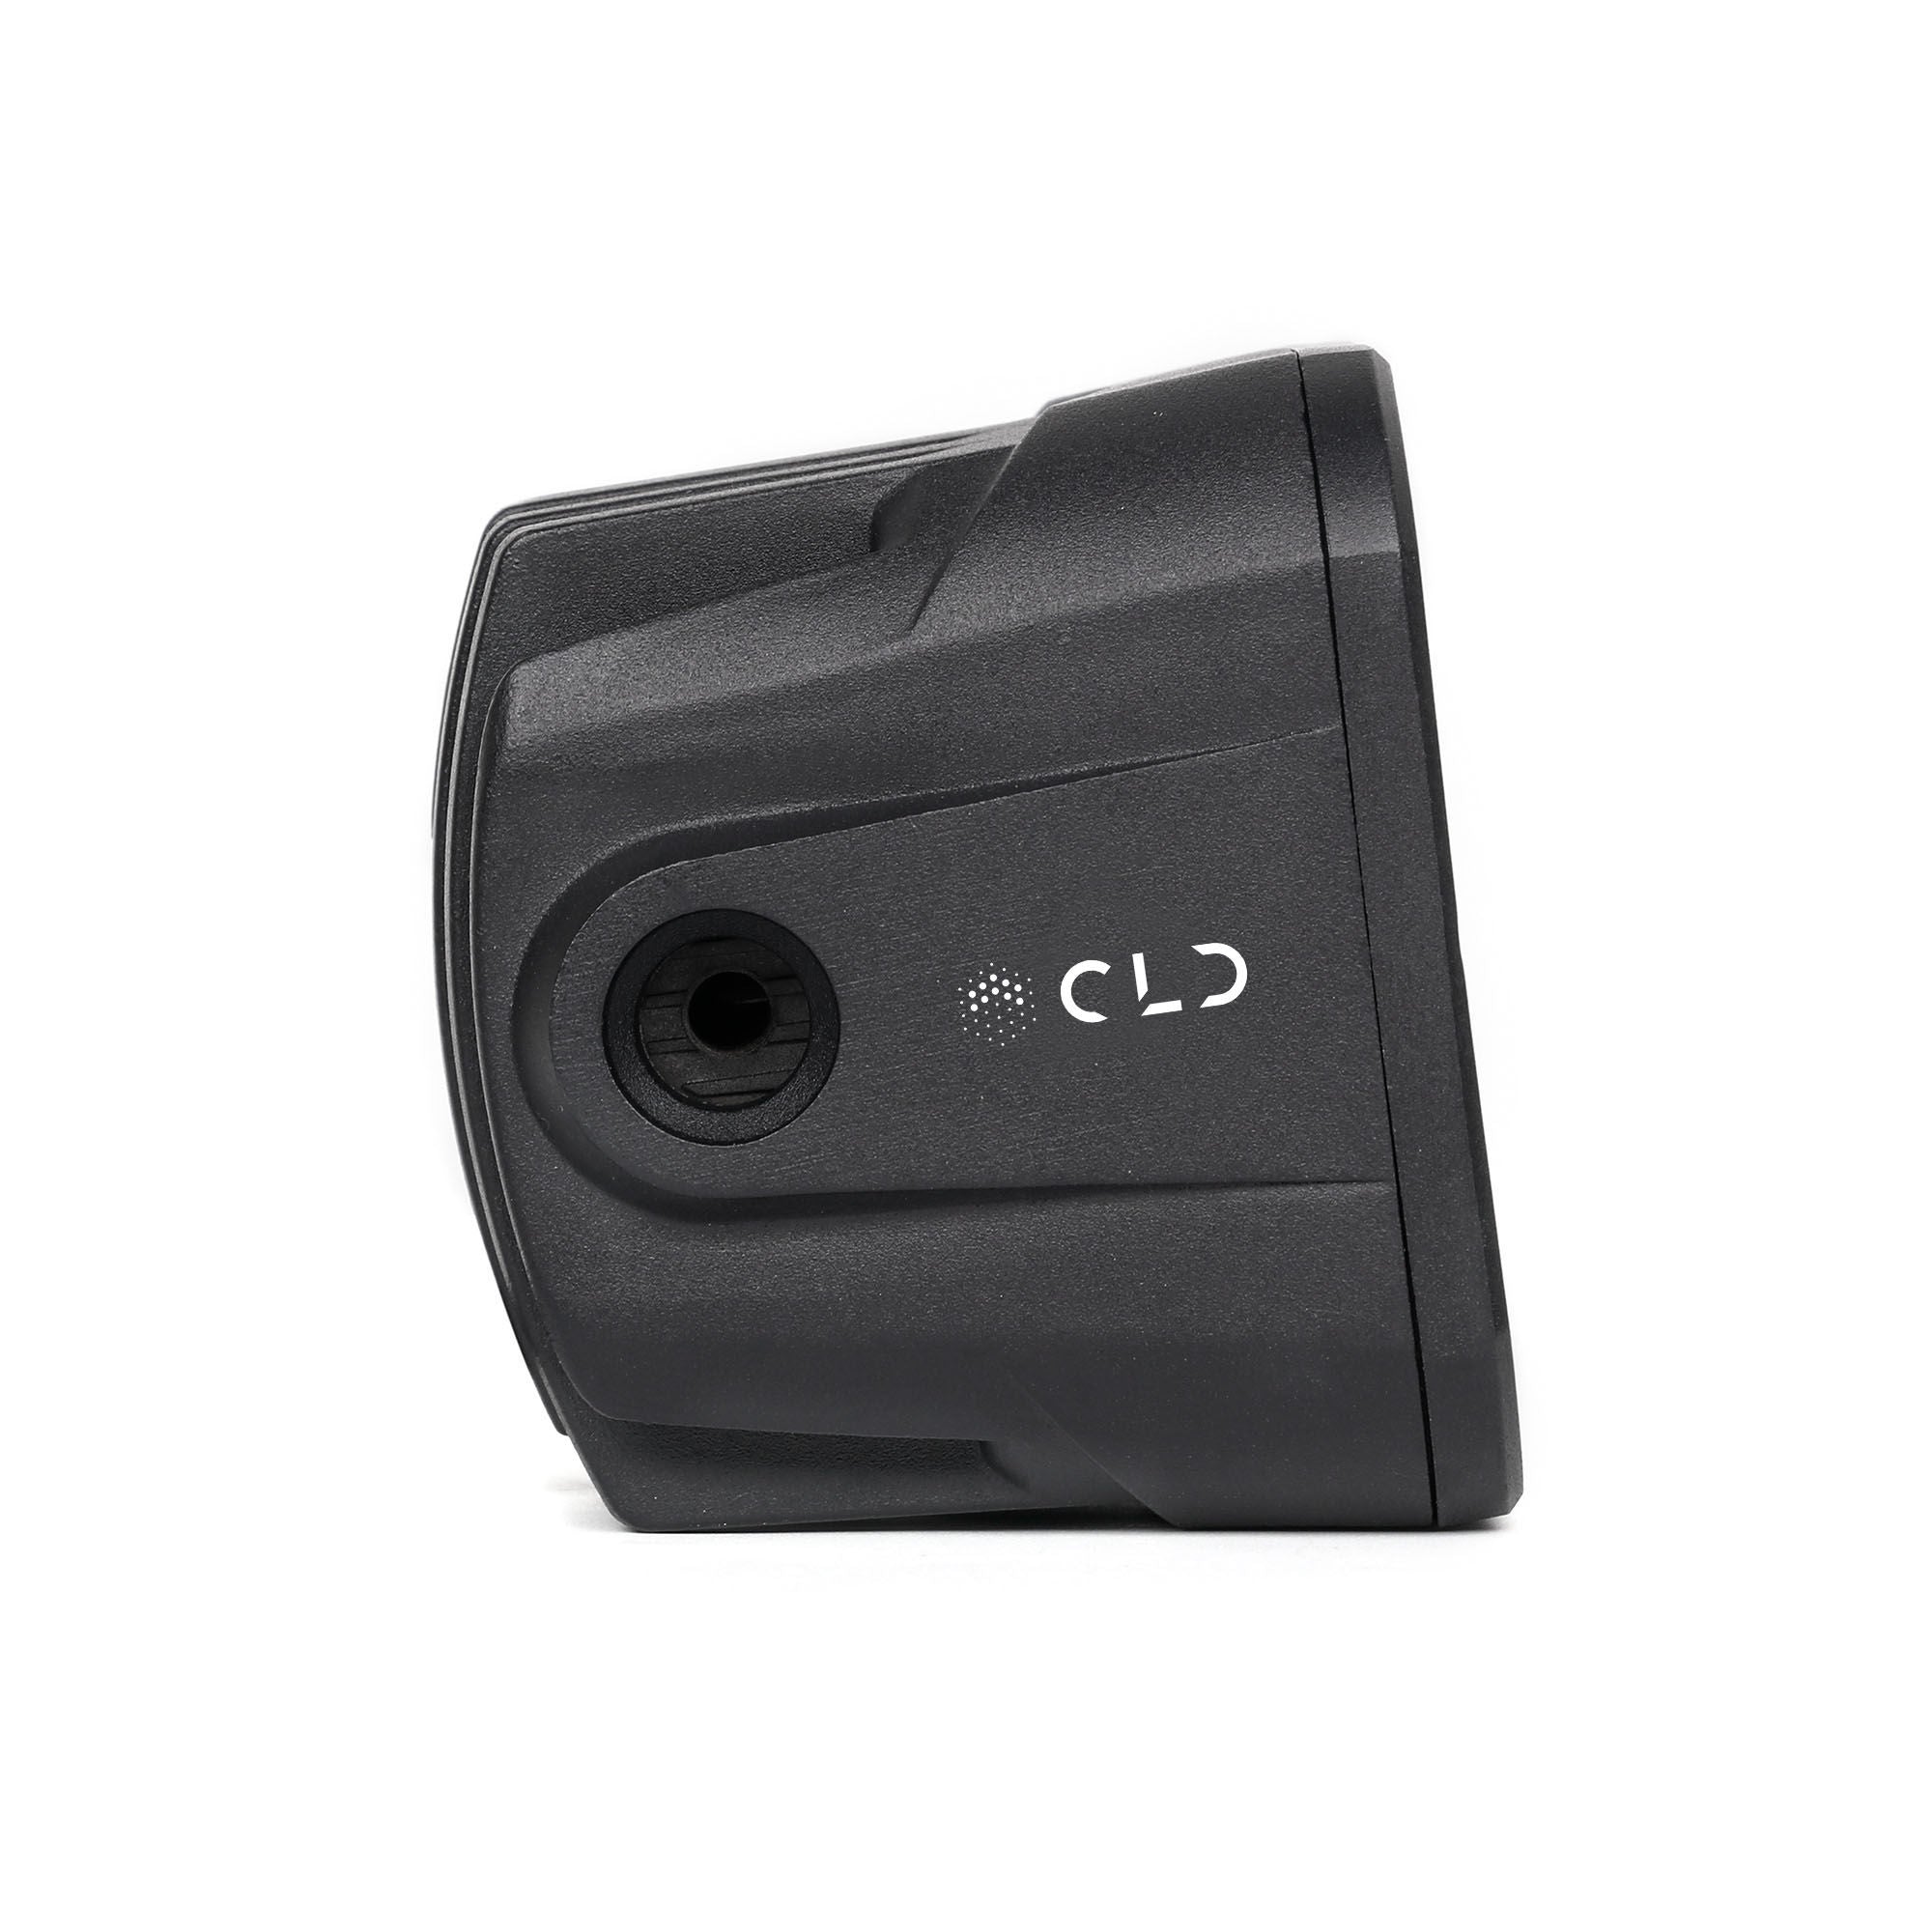 CLD CLDPCHB - 3" Street Legal LED Pod Light - Auxiliary Square High Beam (914 Lumens)